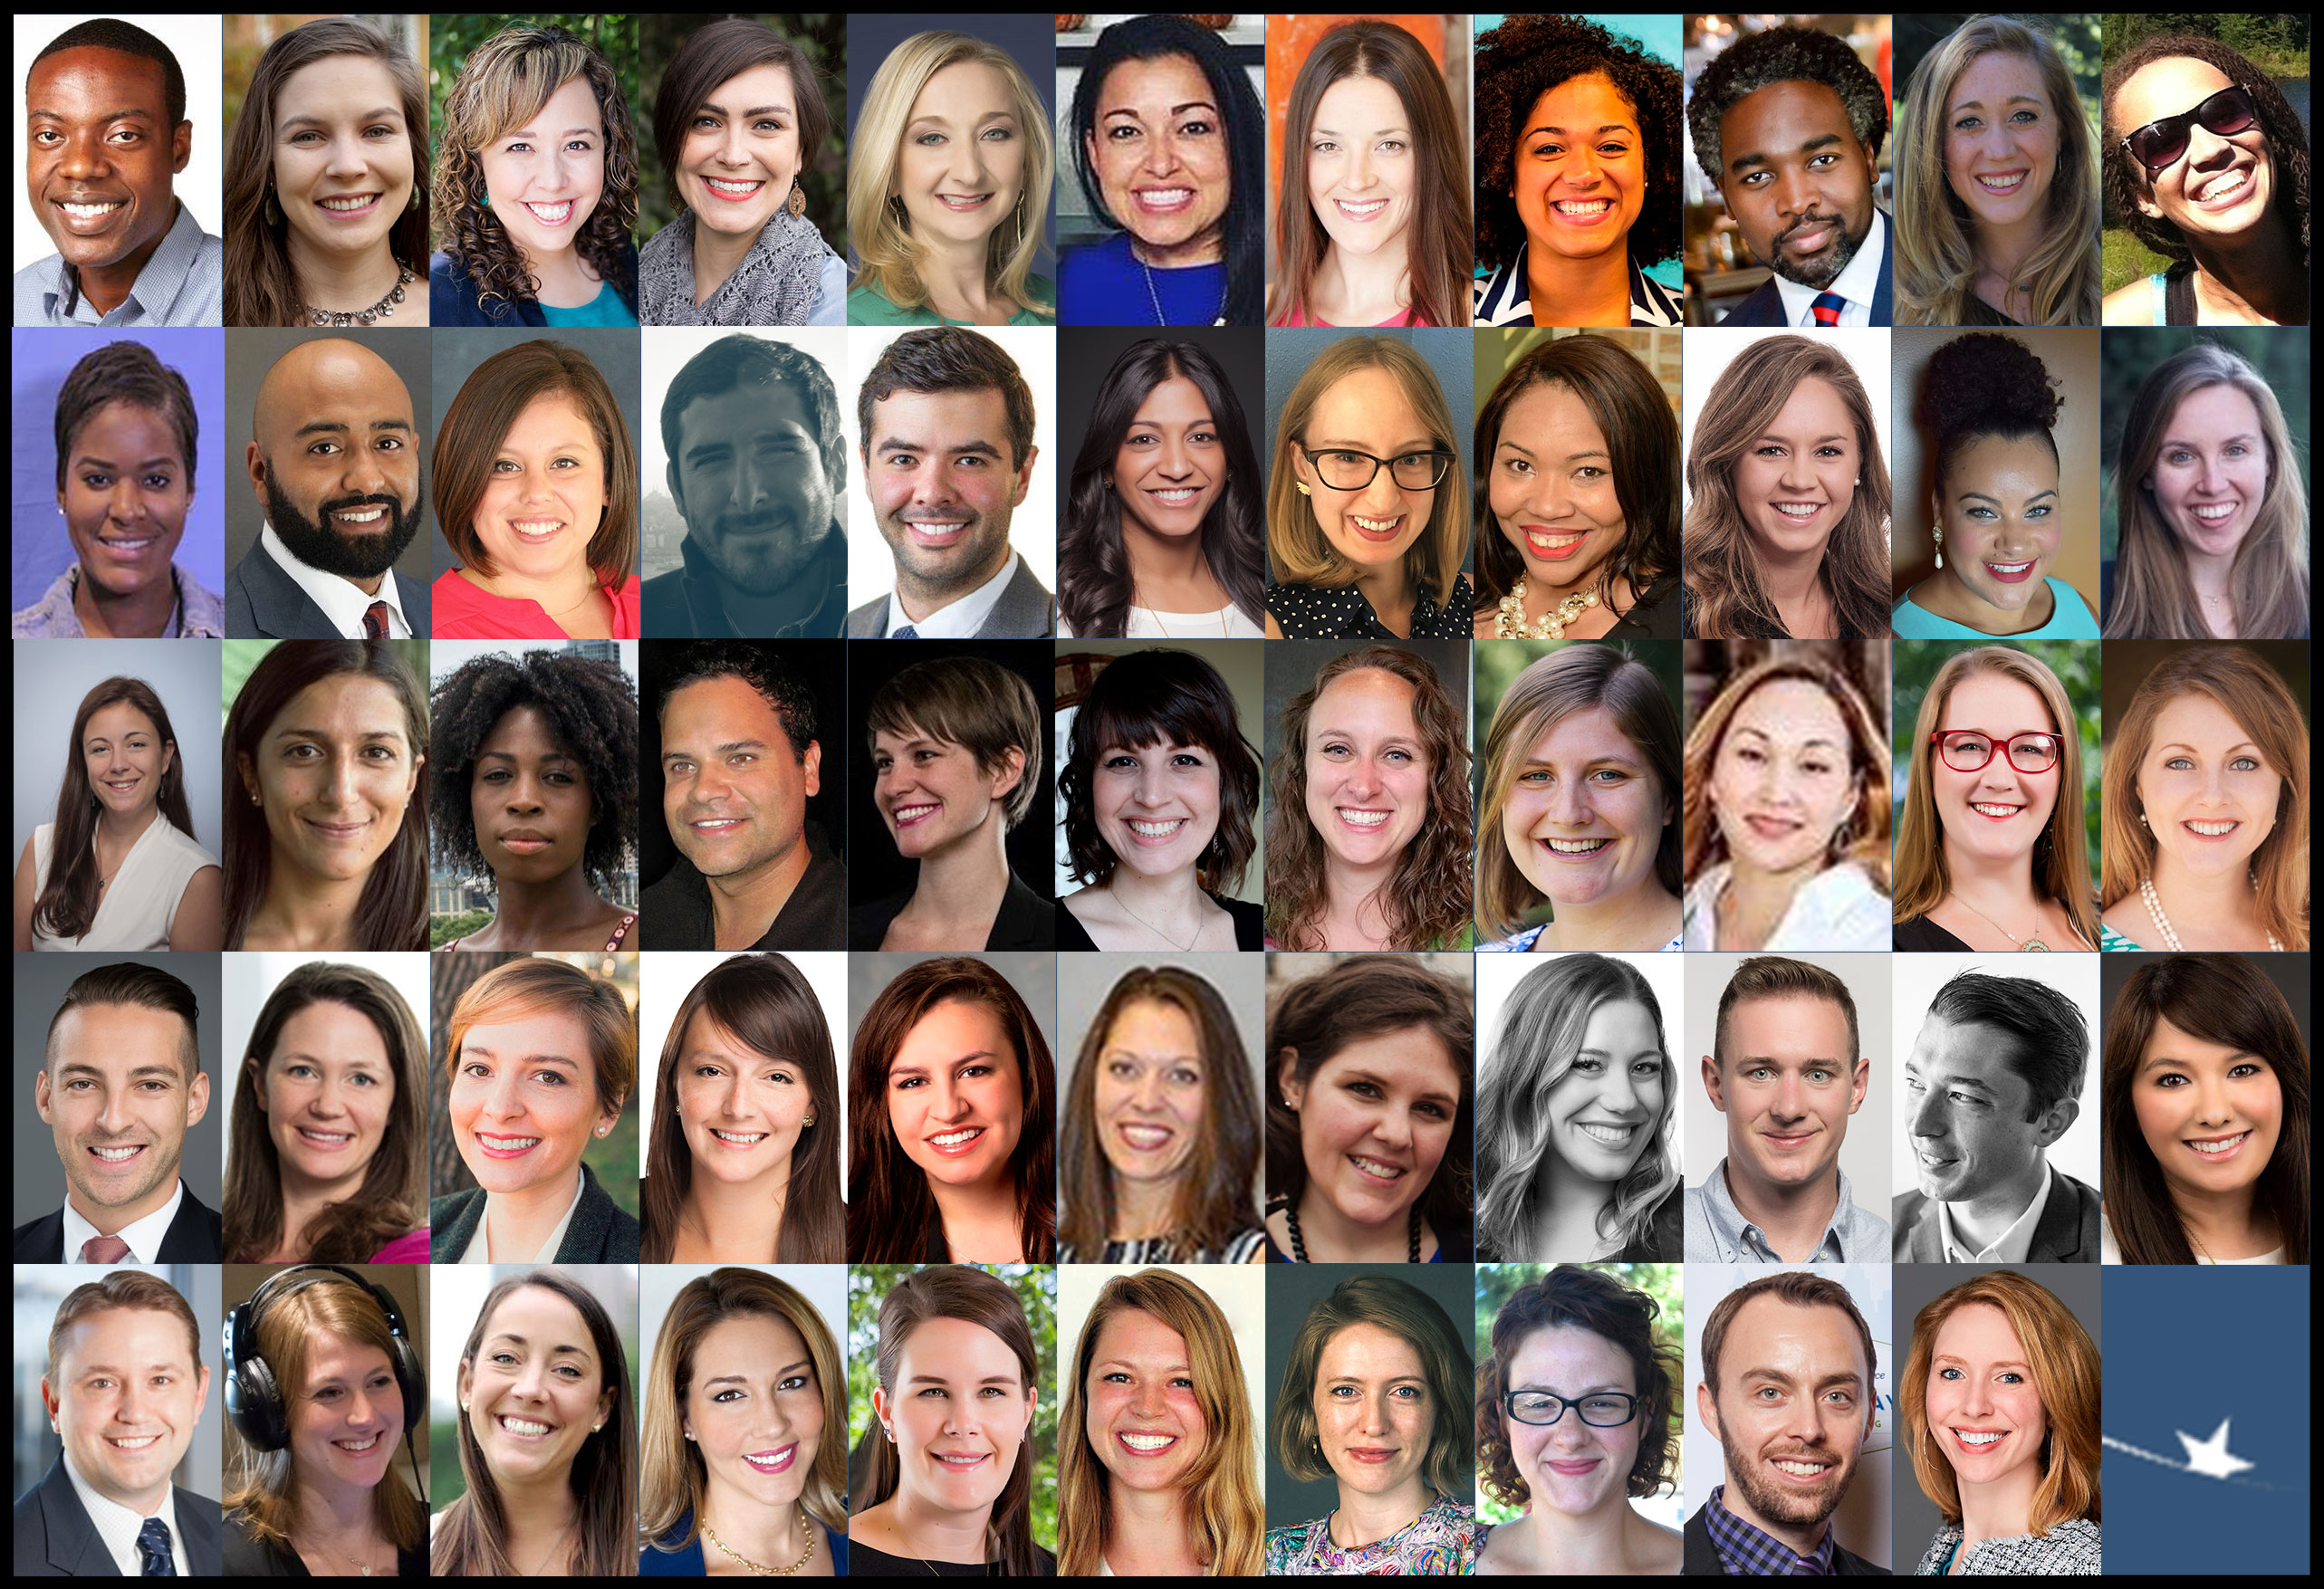 Announcing the Emerge Class of 2018!